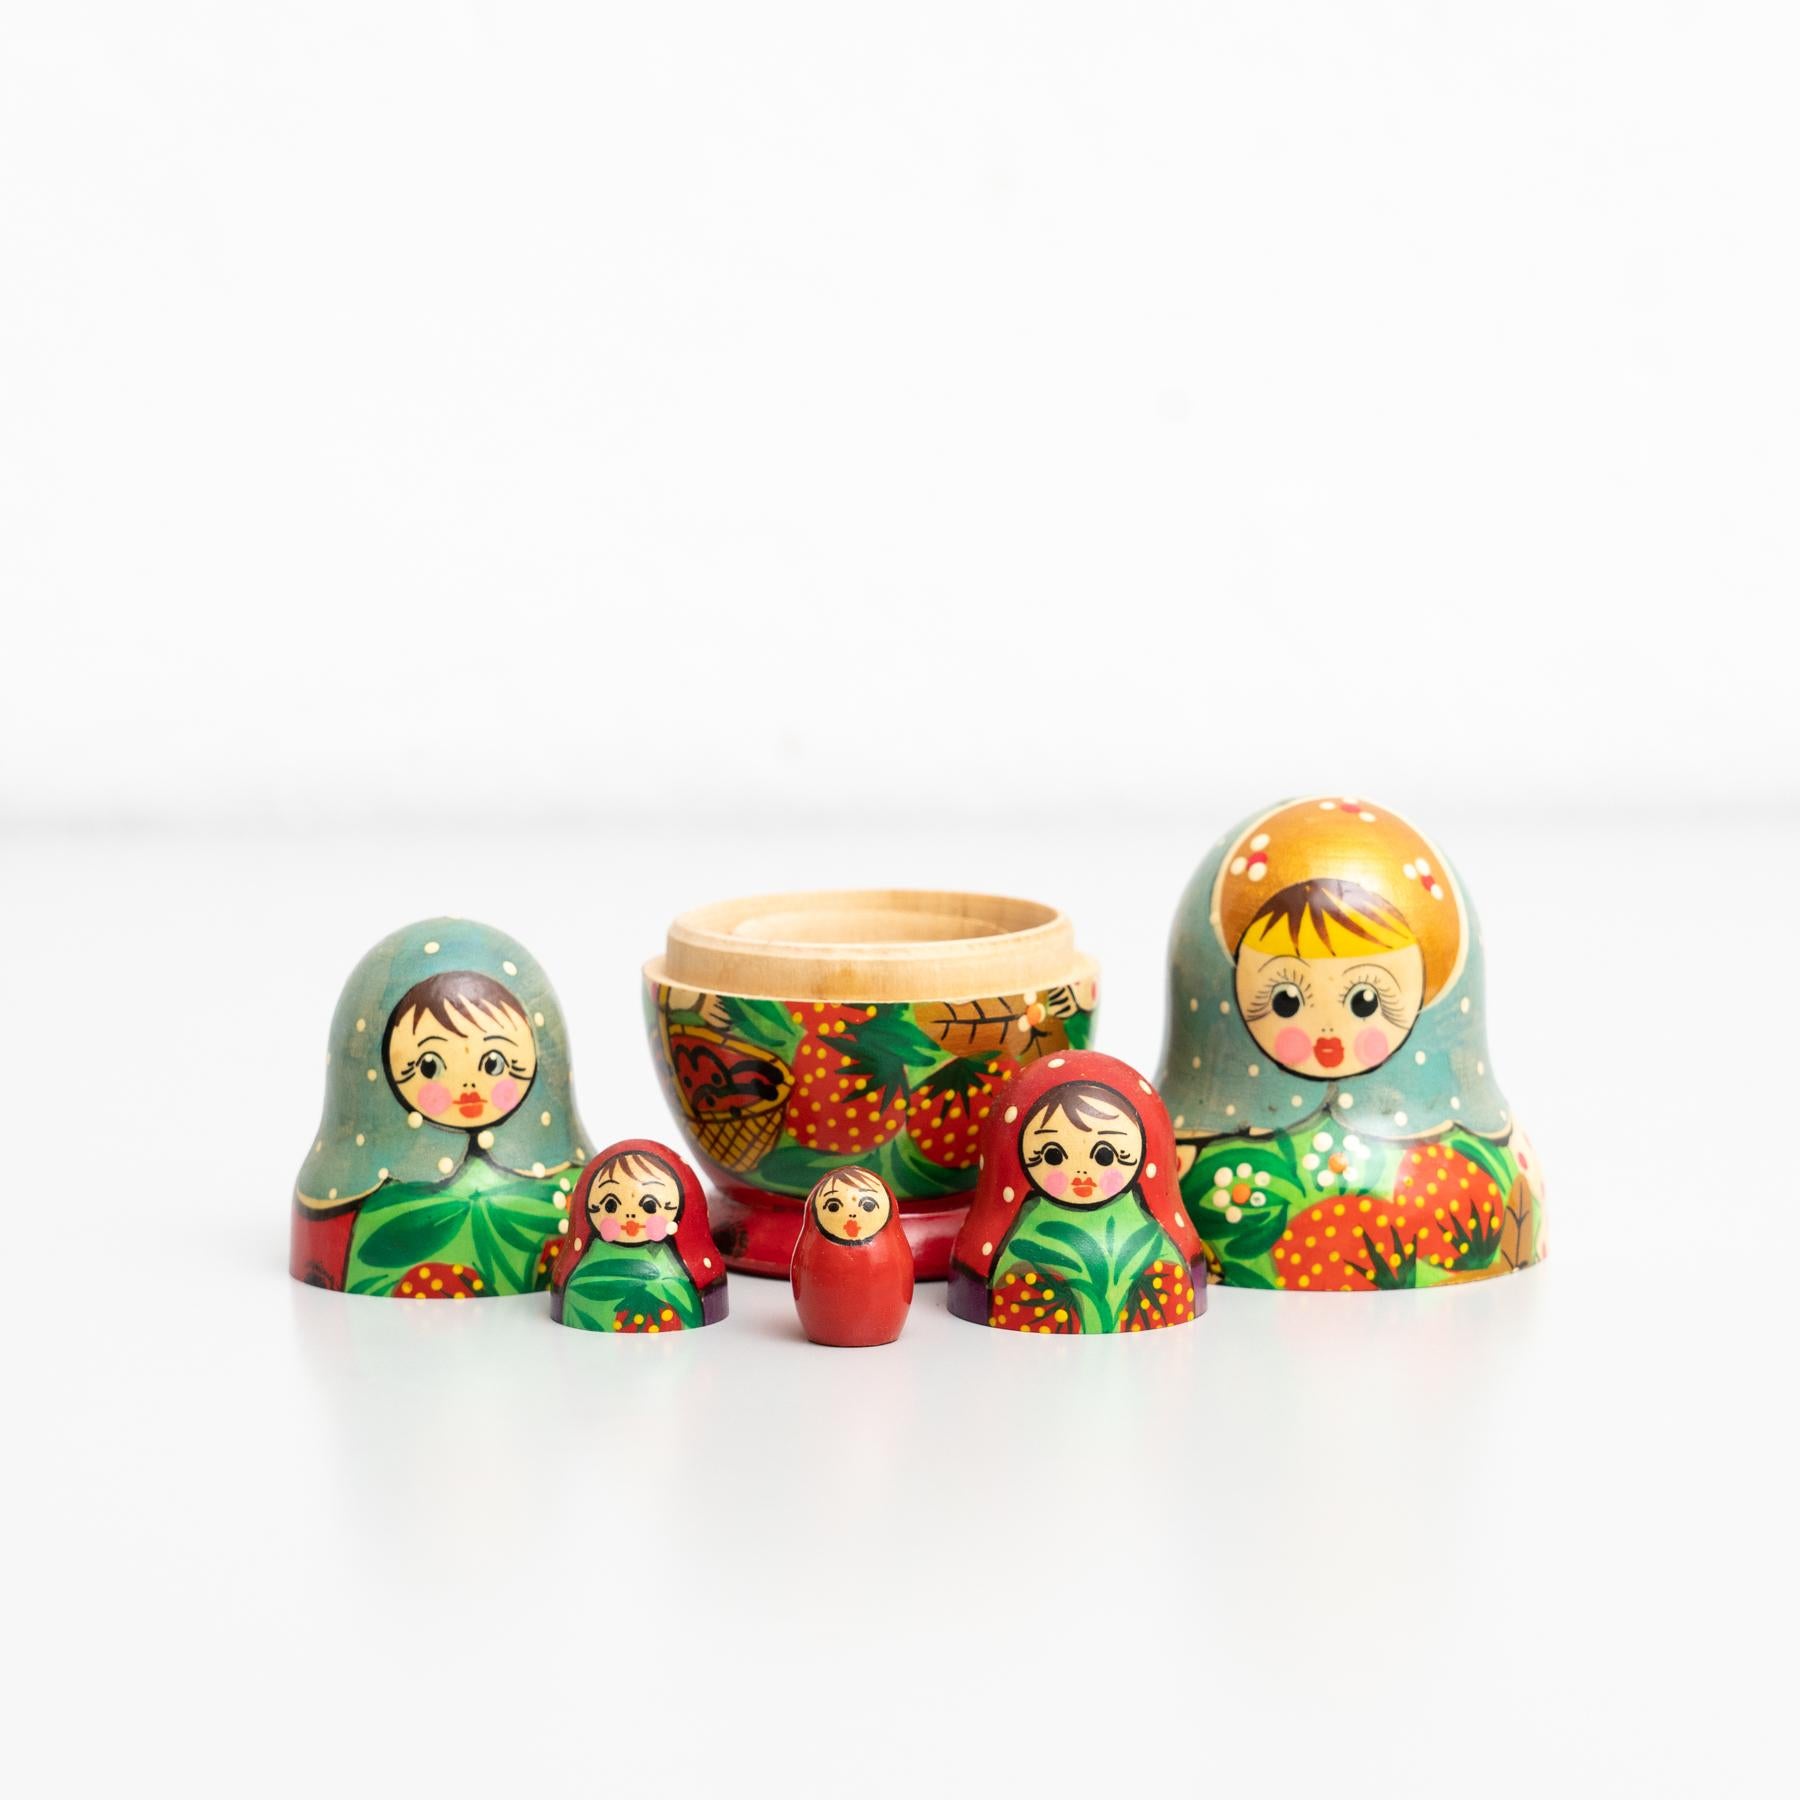 Antique Traditional Hand-Painted Wooden Russian Doll, circa 1960 For Sale 6